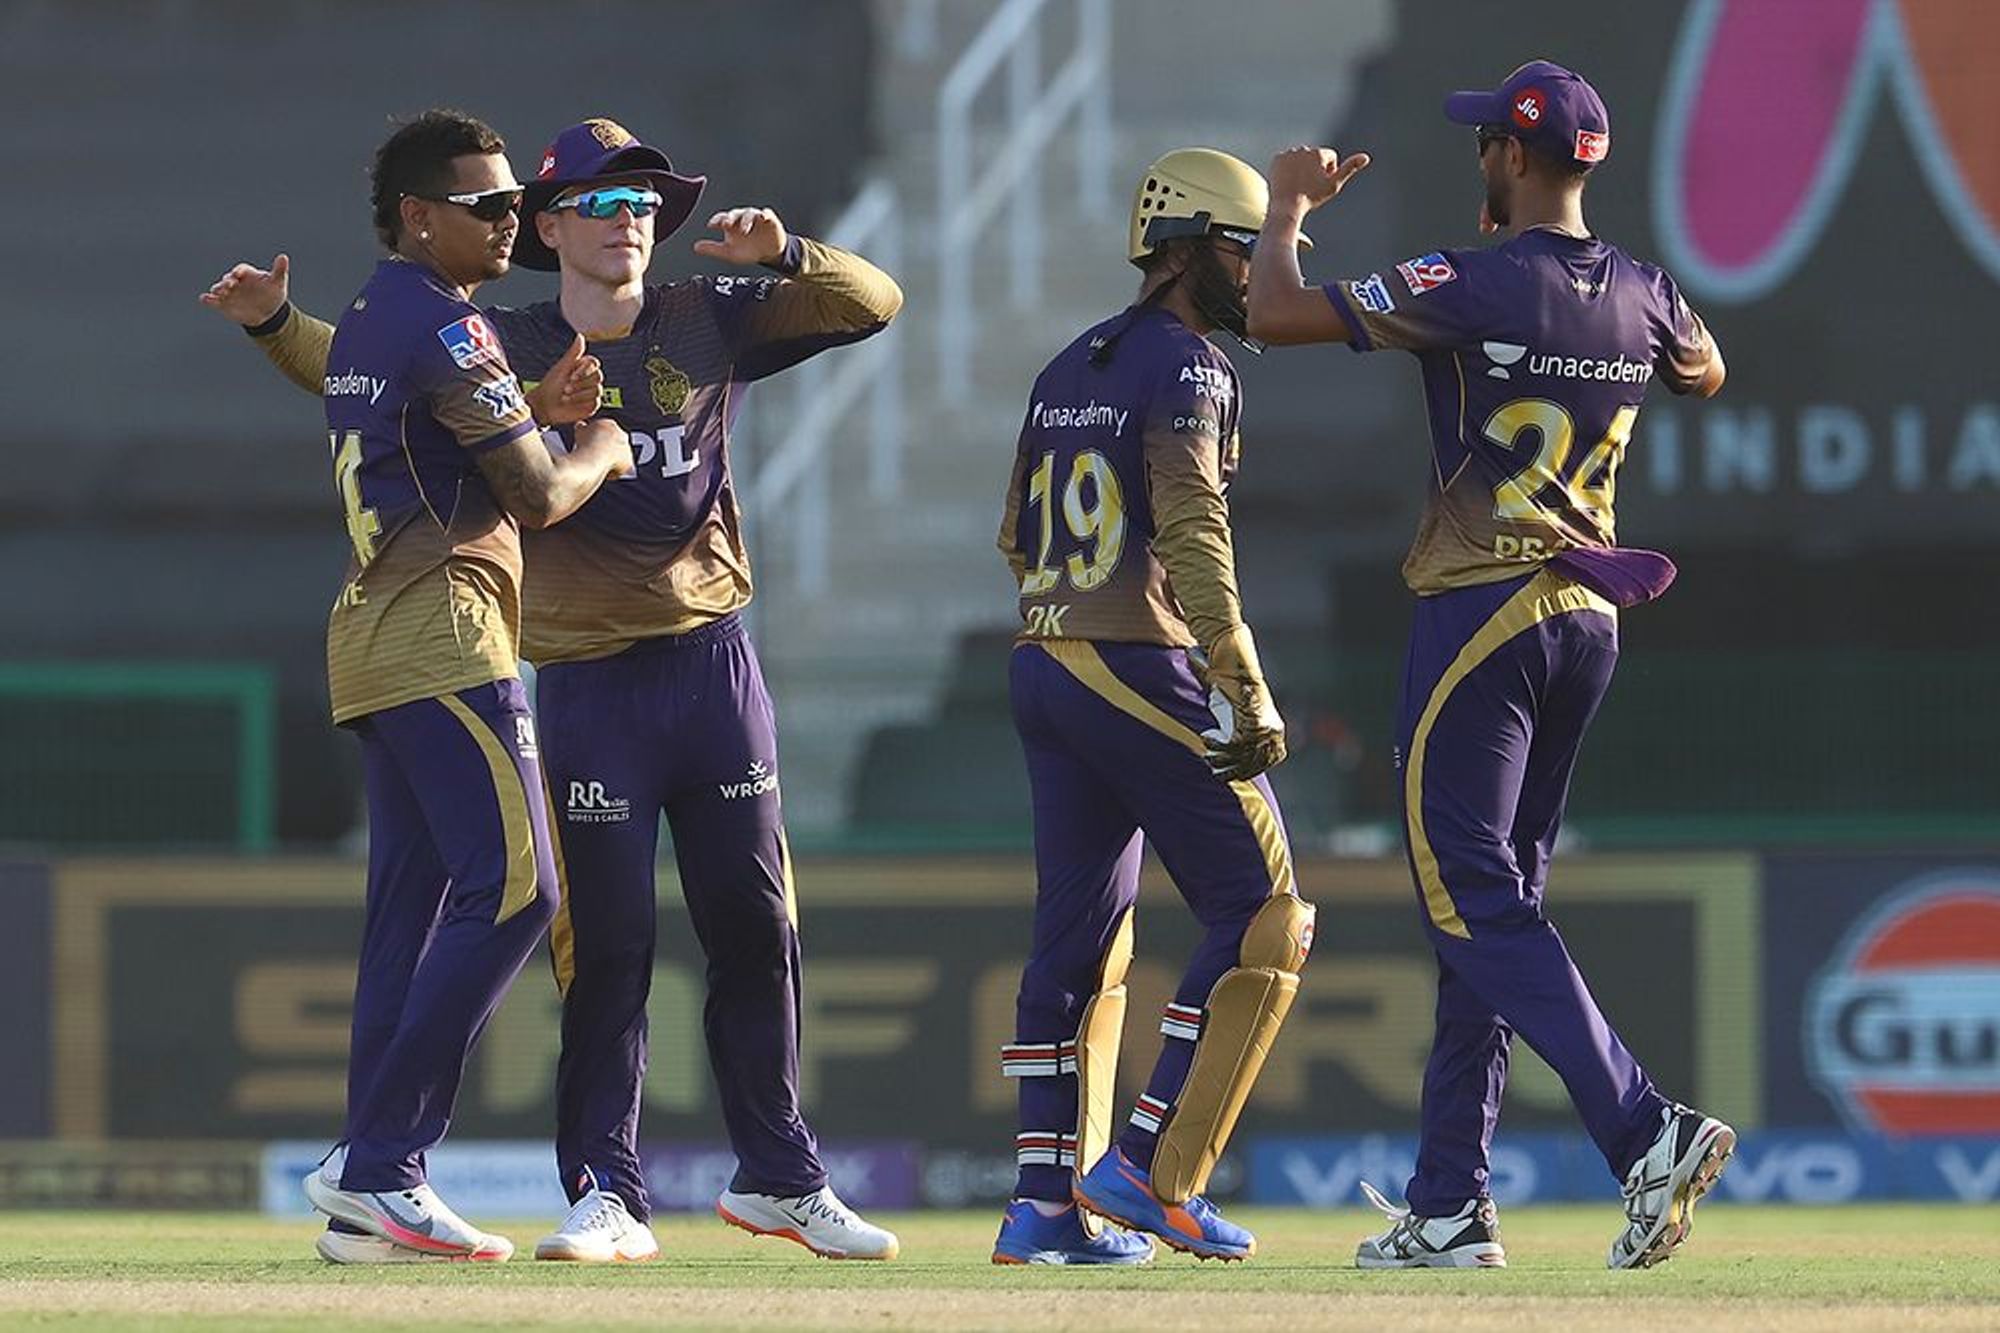 Eoin Morgan was happy with KKR's run in the ongoing IPL 14 | BCCI/IPL